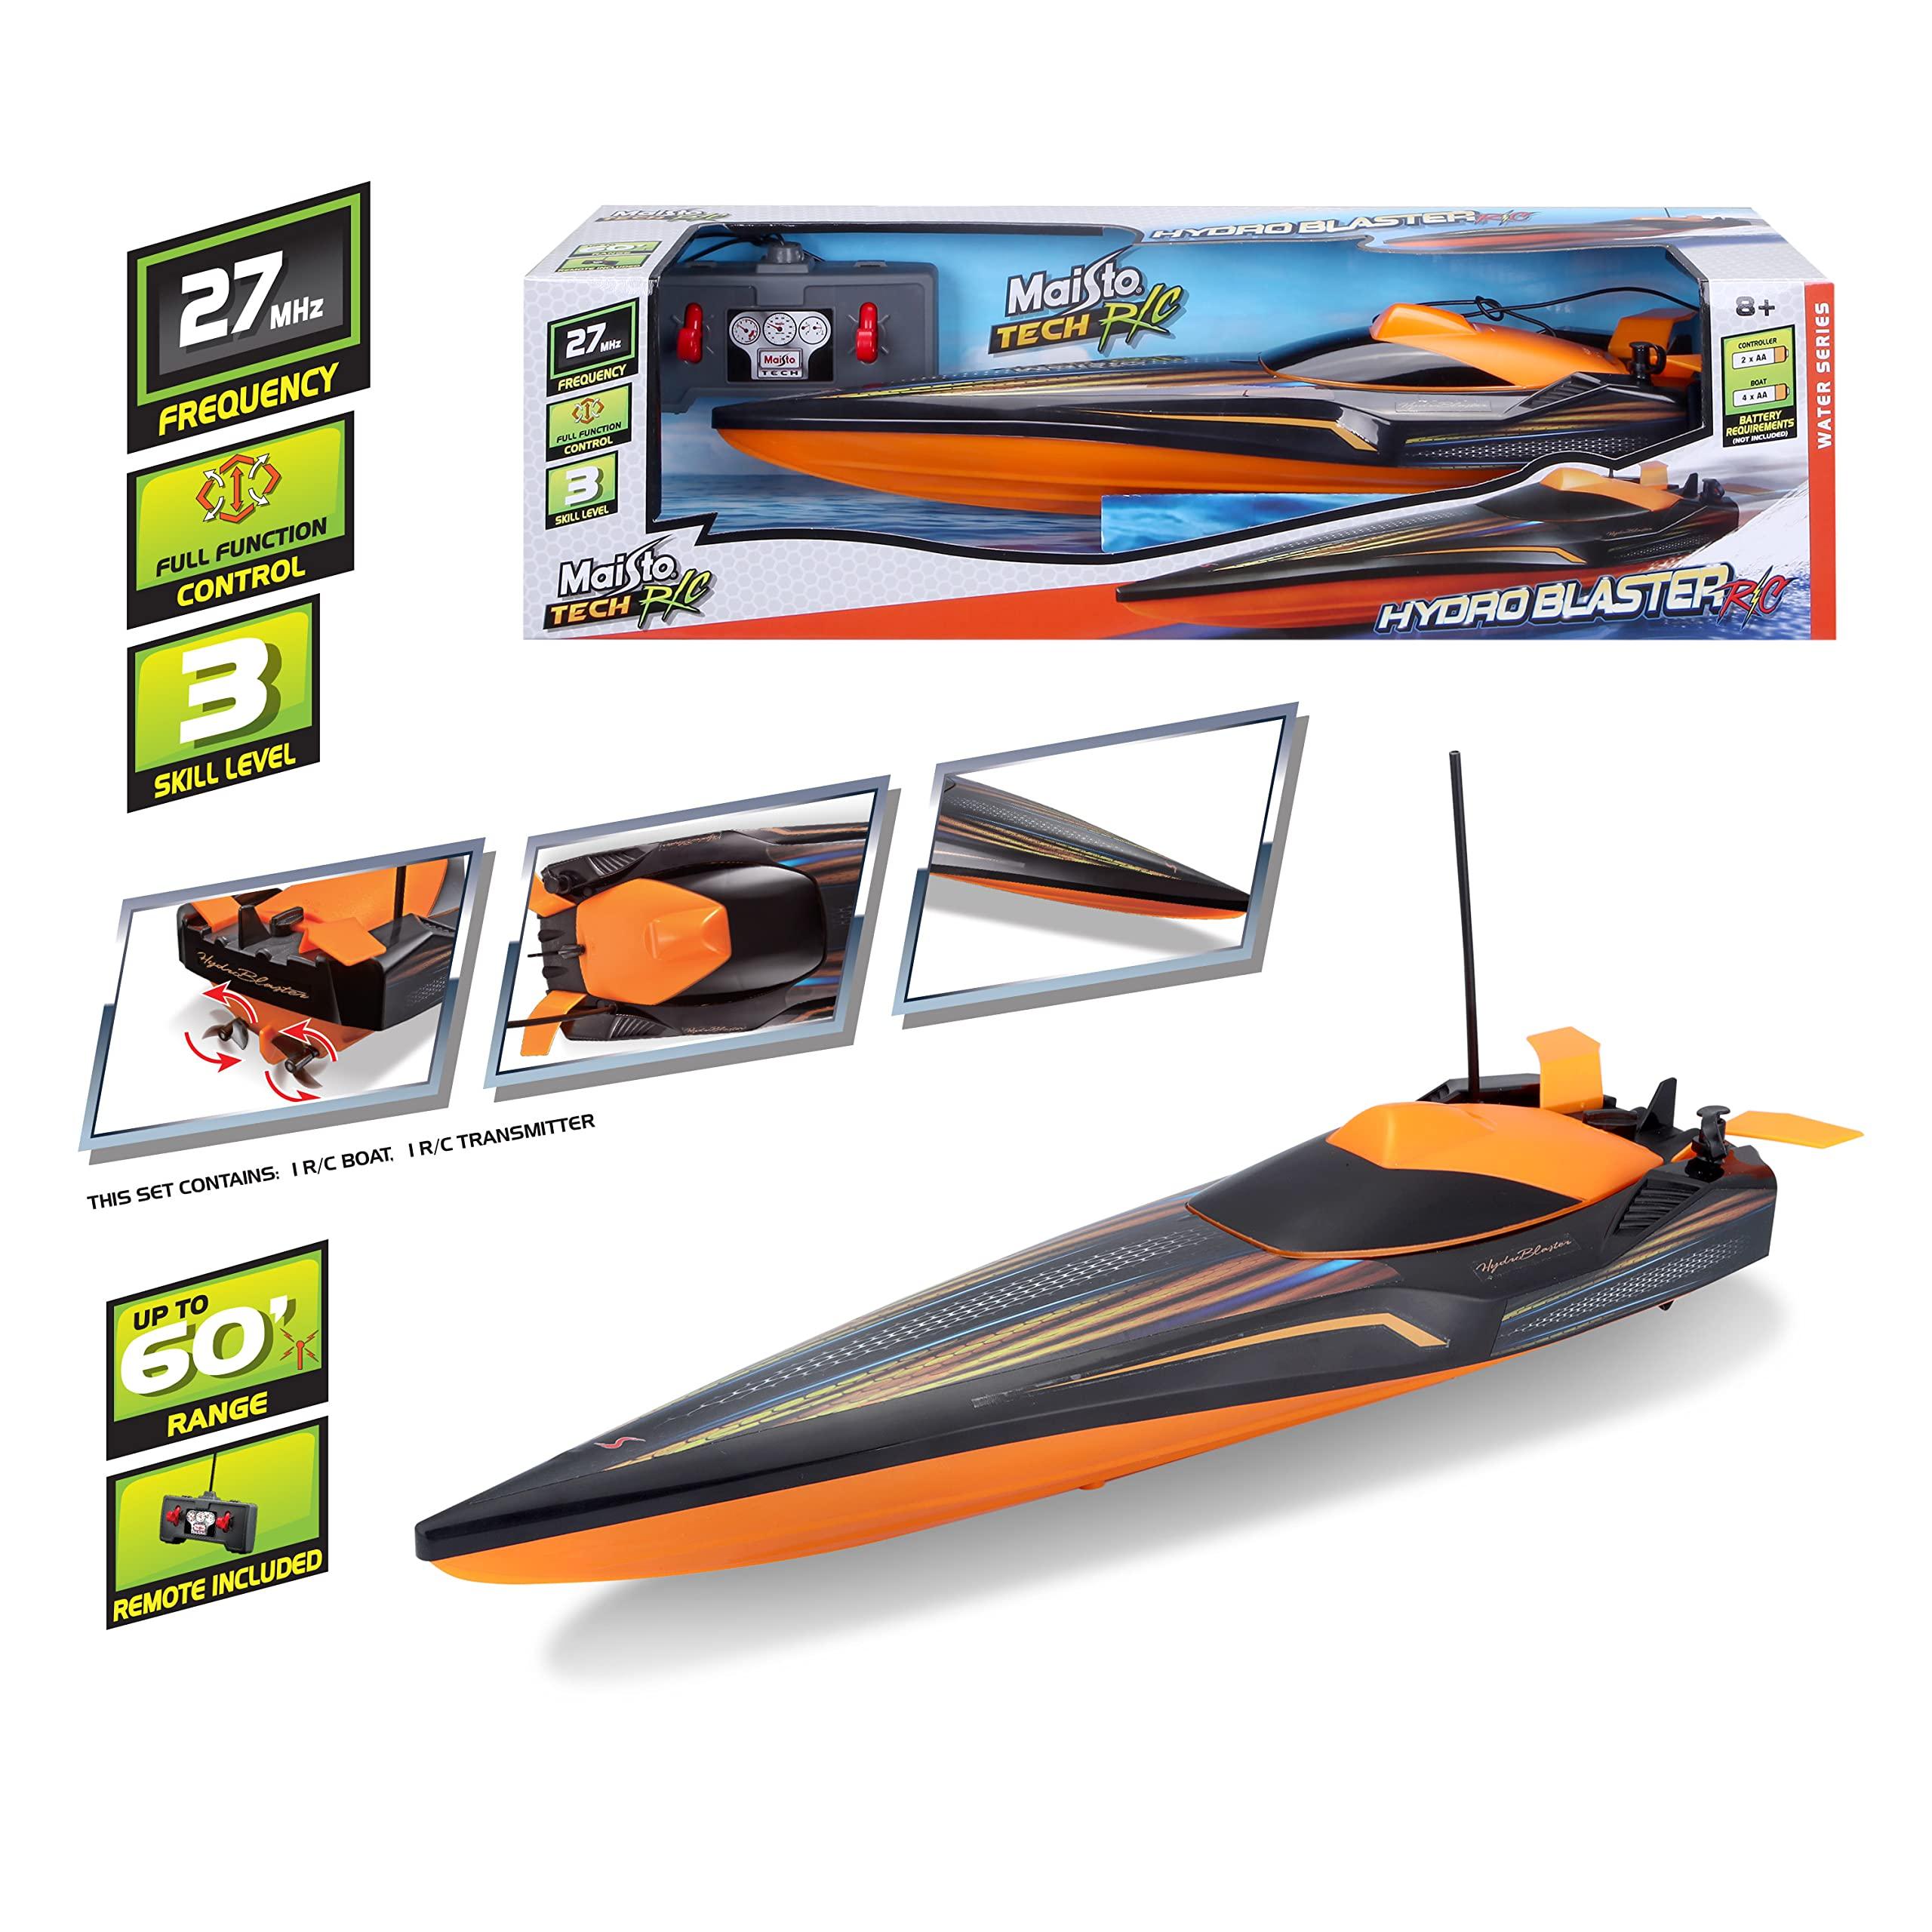 Maisto Hydro Blaster Speed Boat: Widely available and affordable: The perfect water toy for kids and adults.